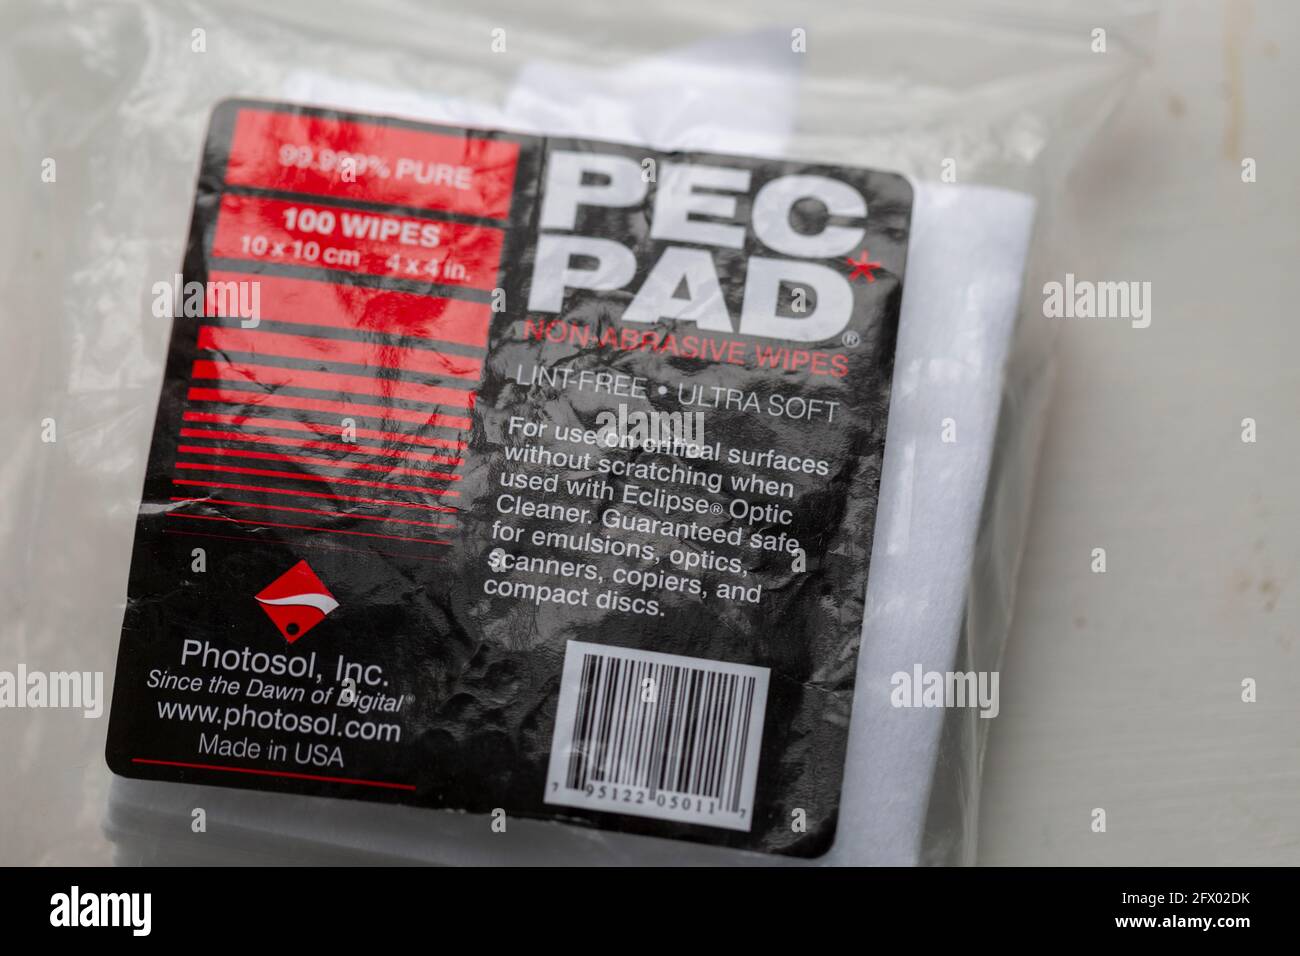 Pec Pad non-abrasive wipes lint free ultra soft Photosol, made in USA Stock  Photo - Alamy